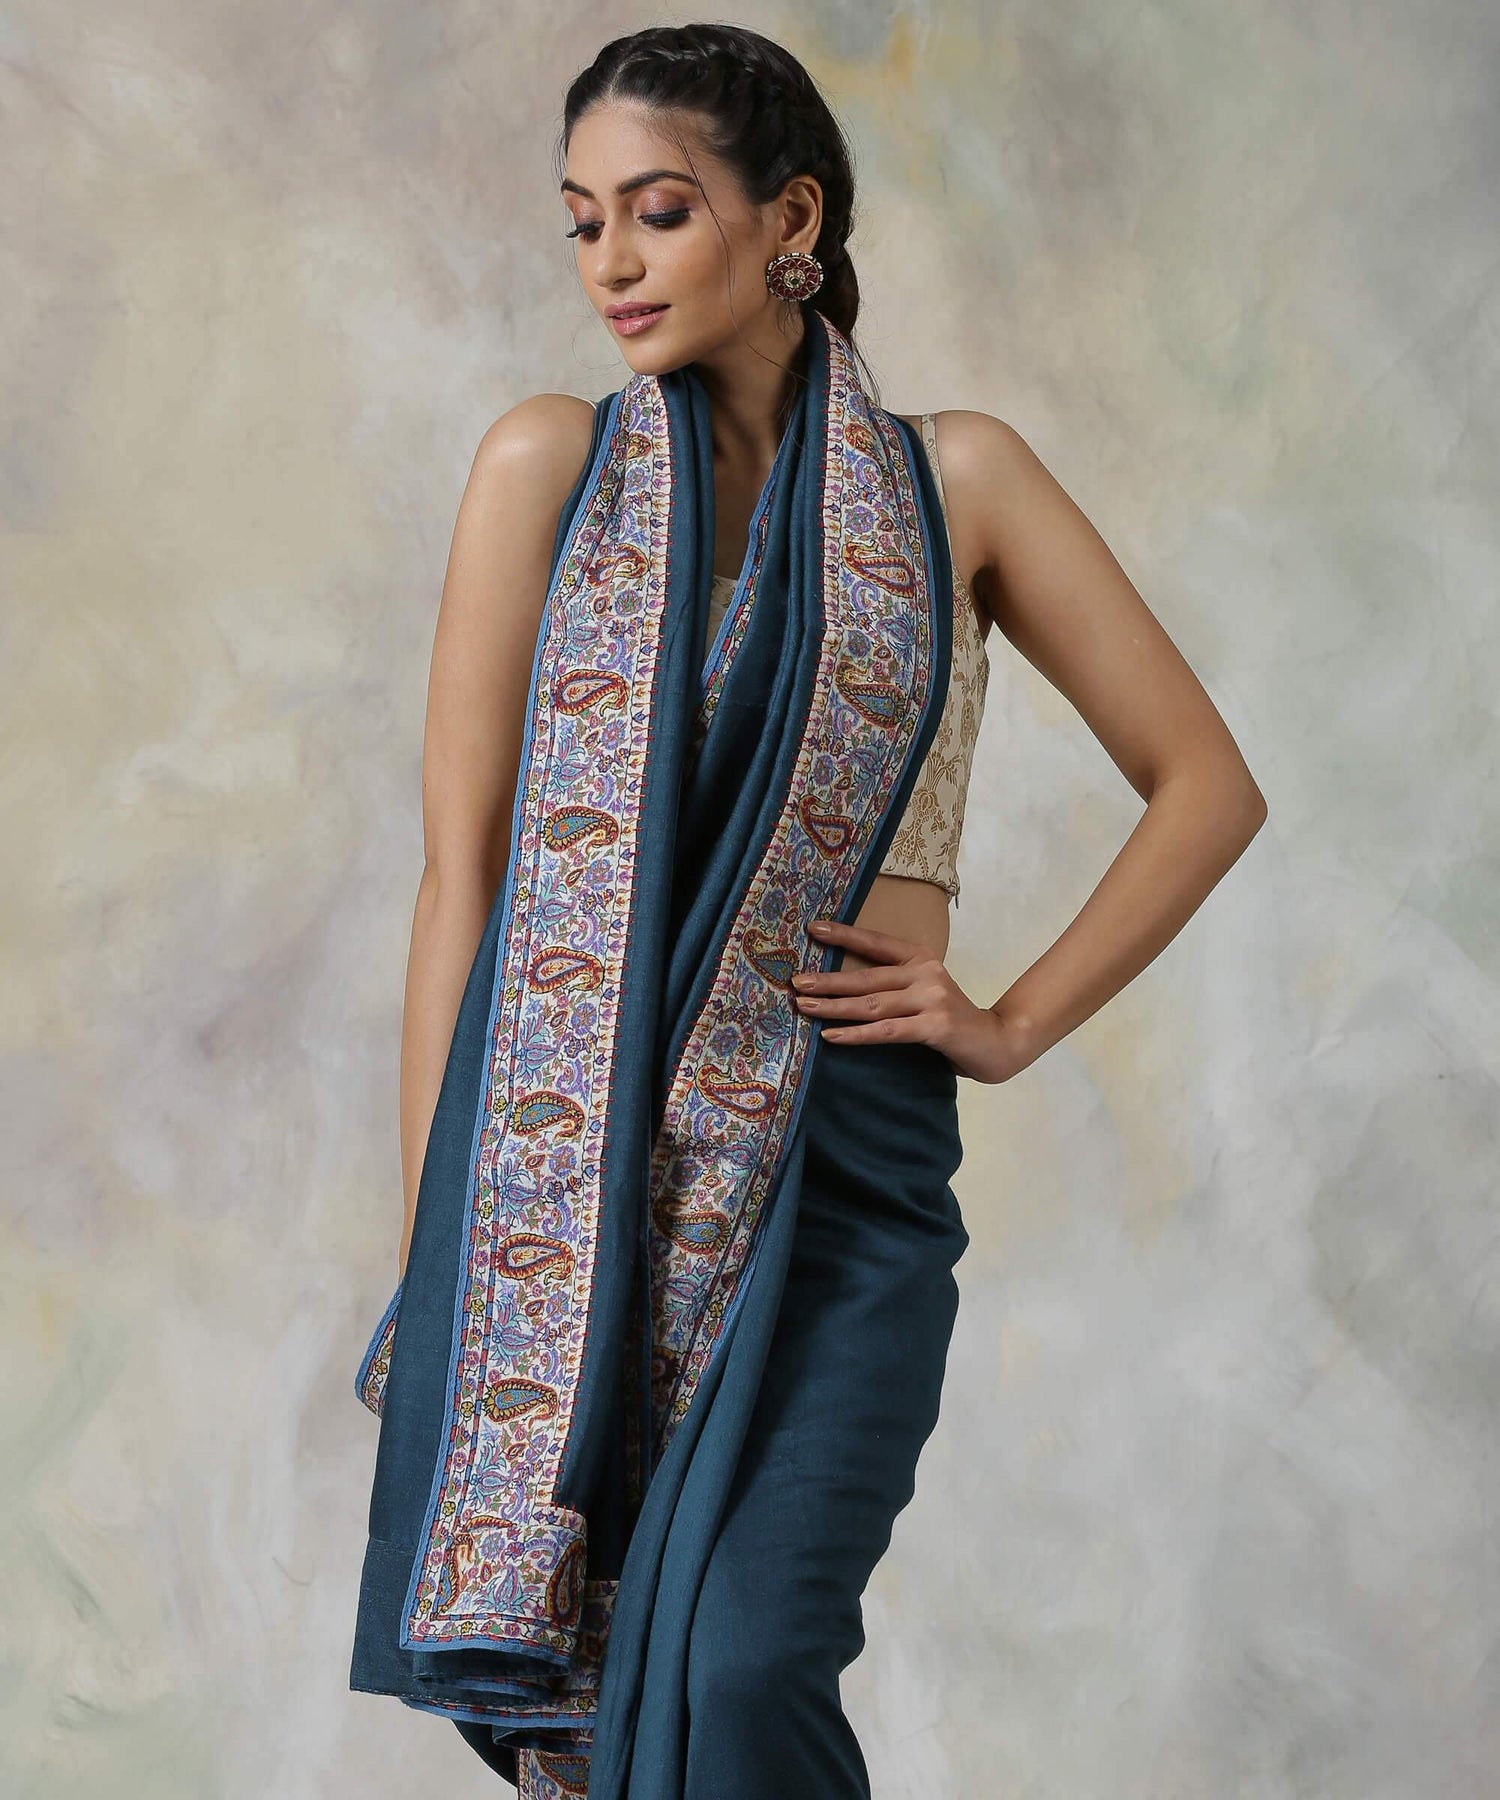 Handwoven_Moonga_Silk_Saree_in_Regal_Blue_with_Hand_Appliqued_Sozni_Needle_Work_Border_WeaverStory_01